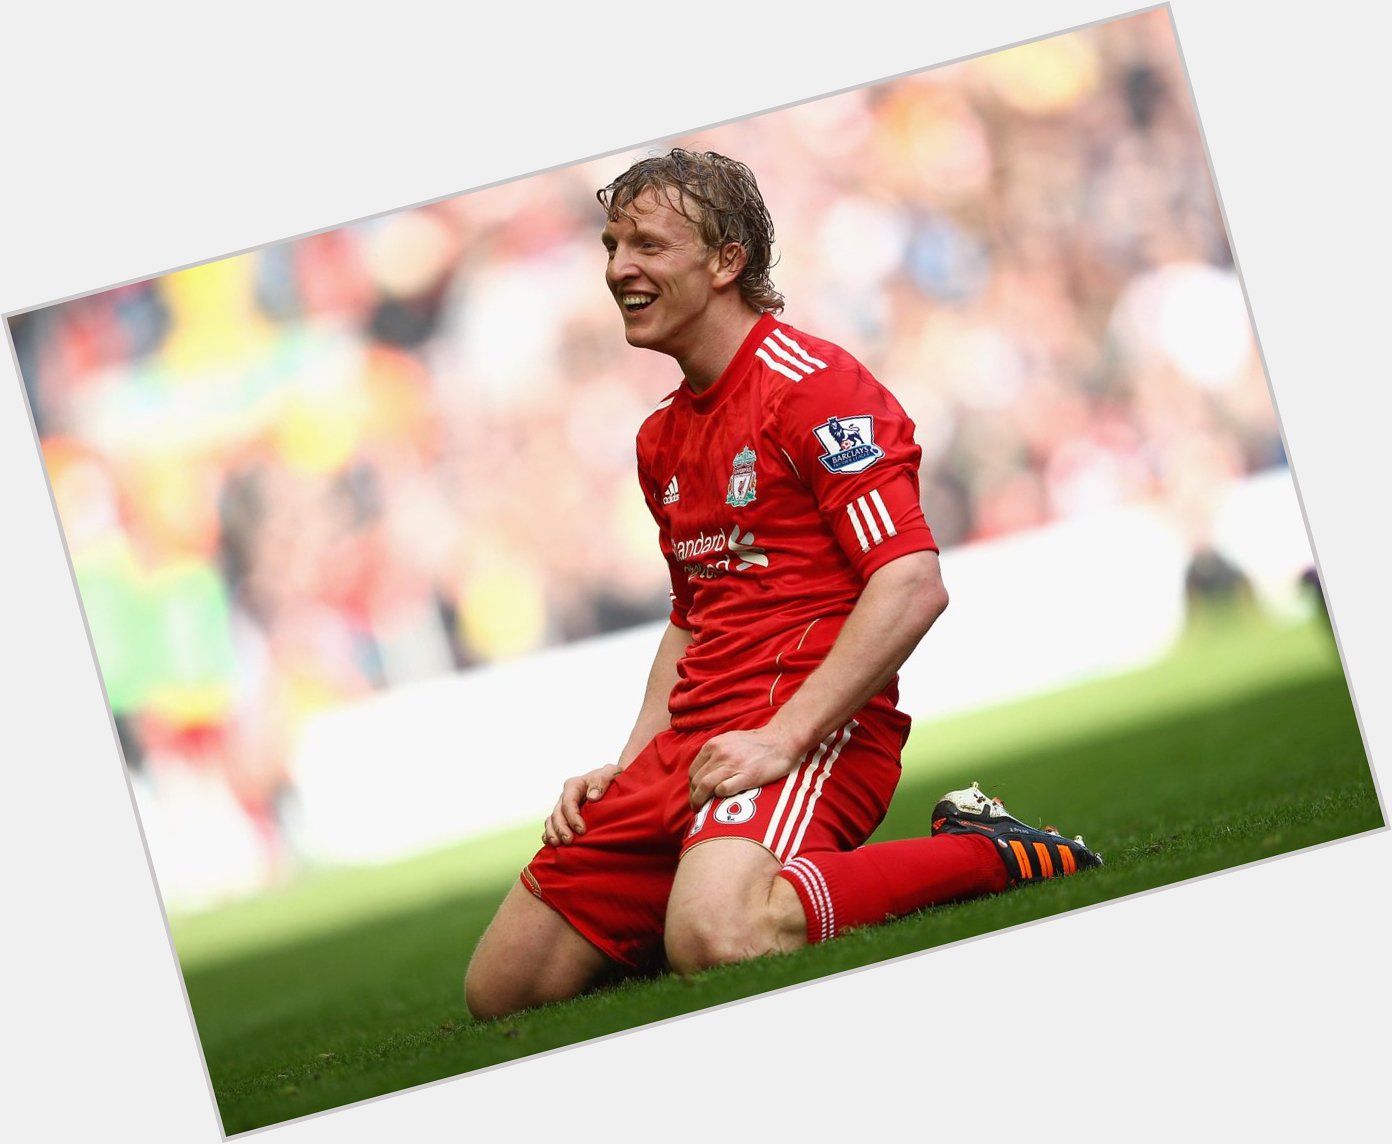 Happy birthday Dirk Kuyt! The former Liverpool man turns 35 today... 